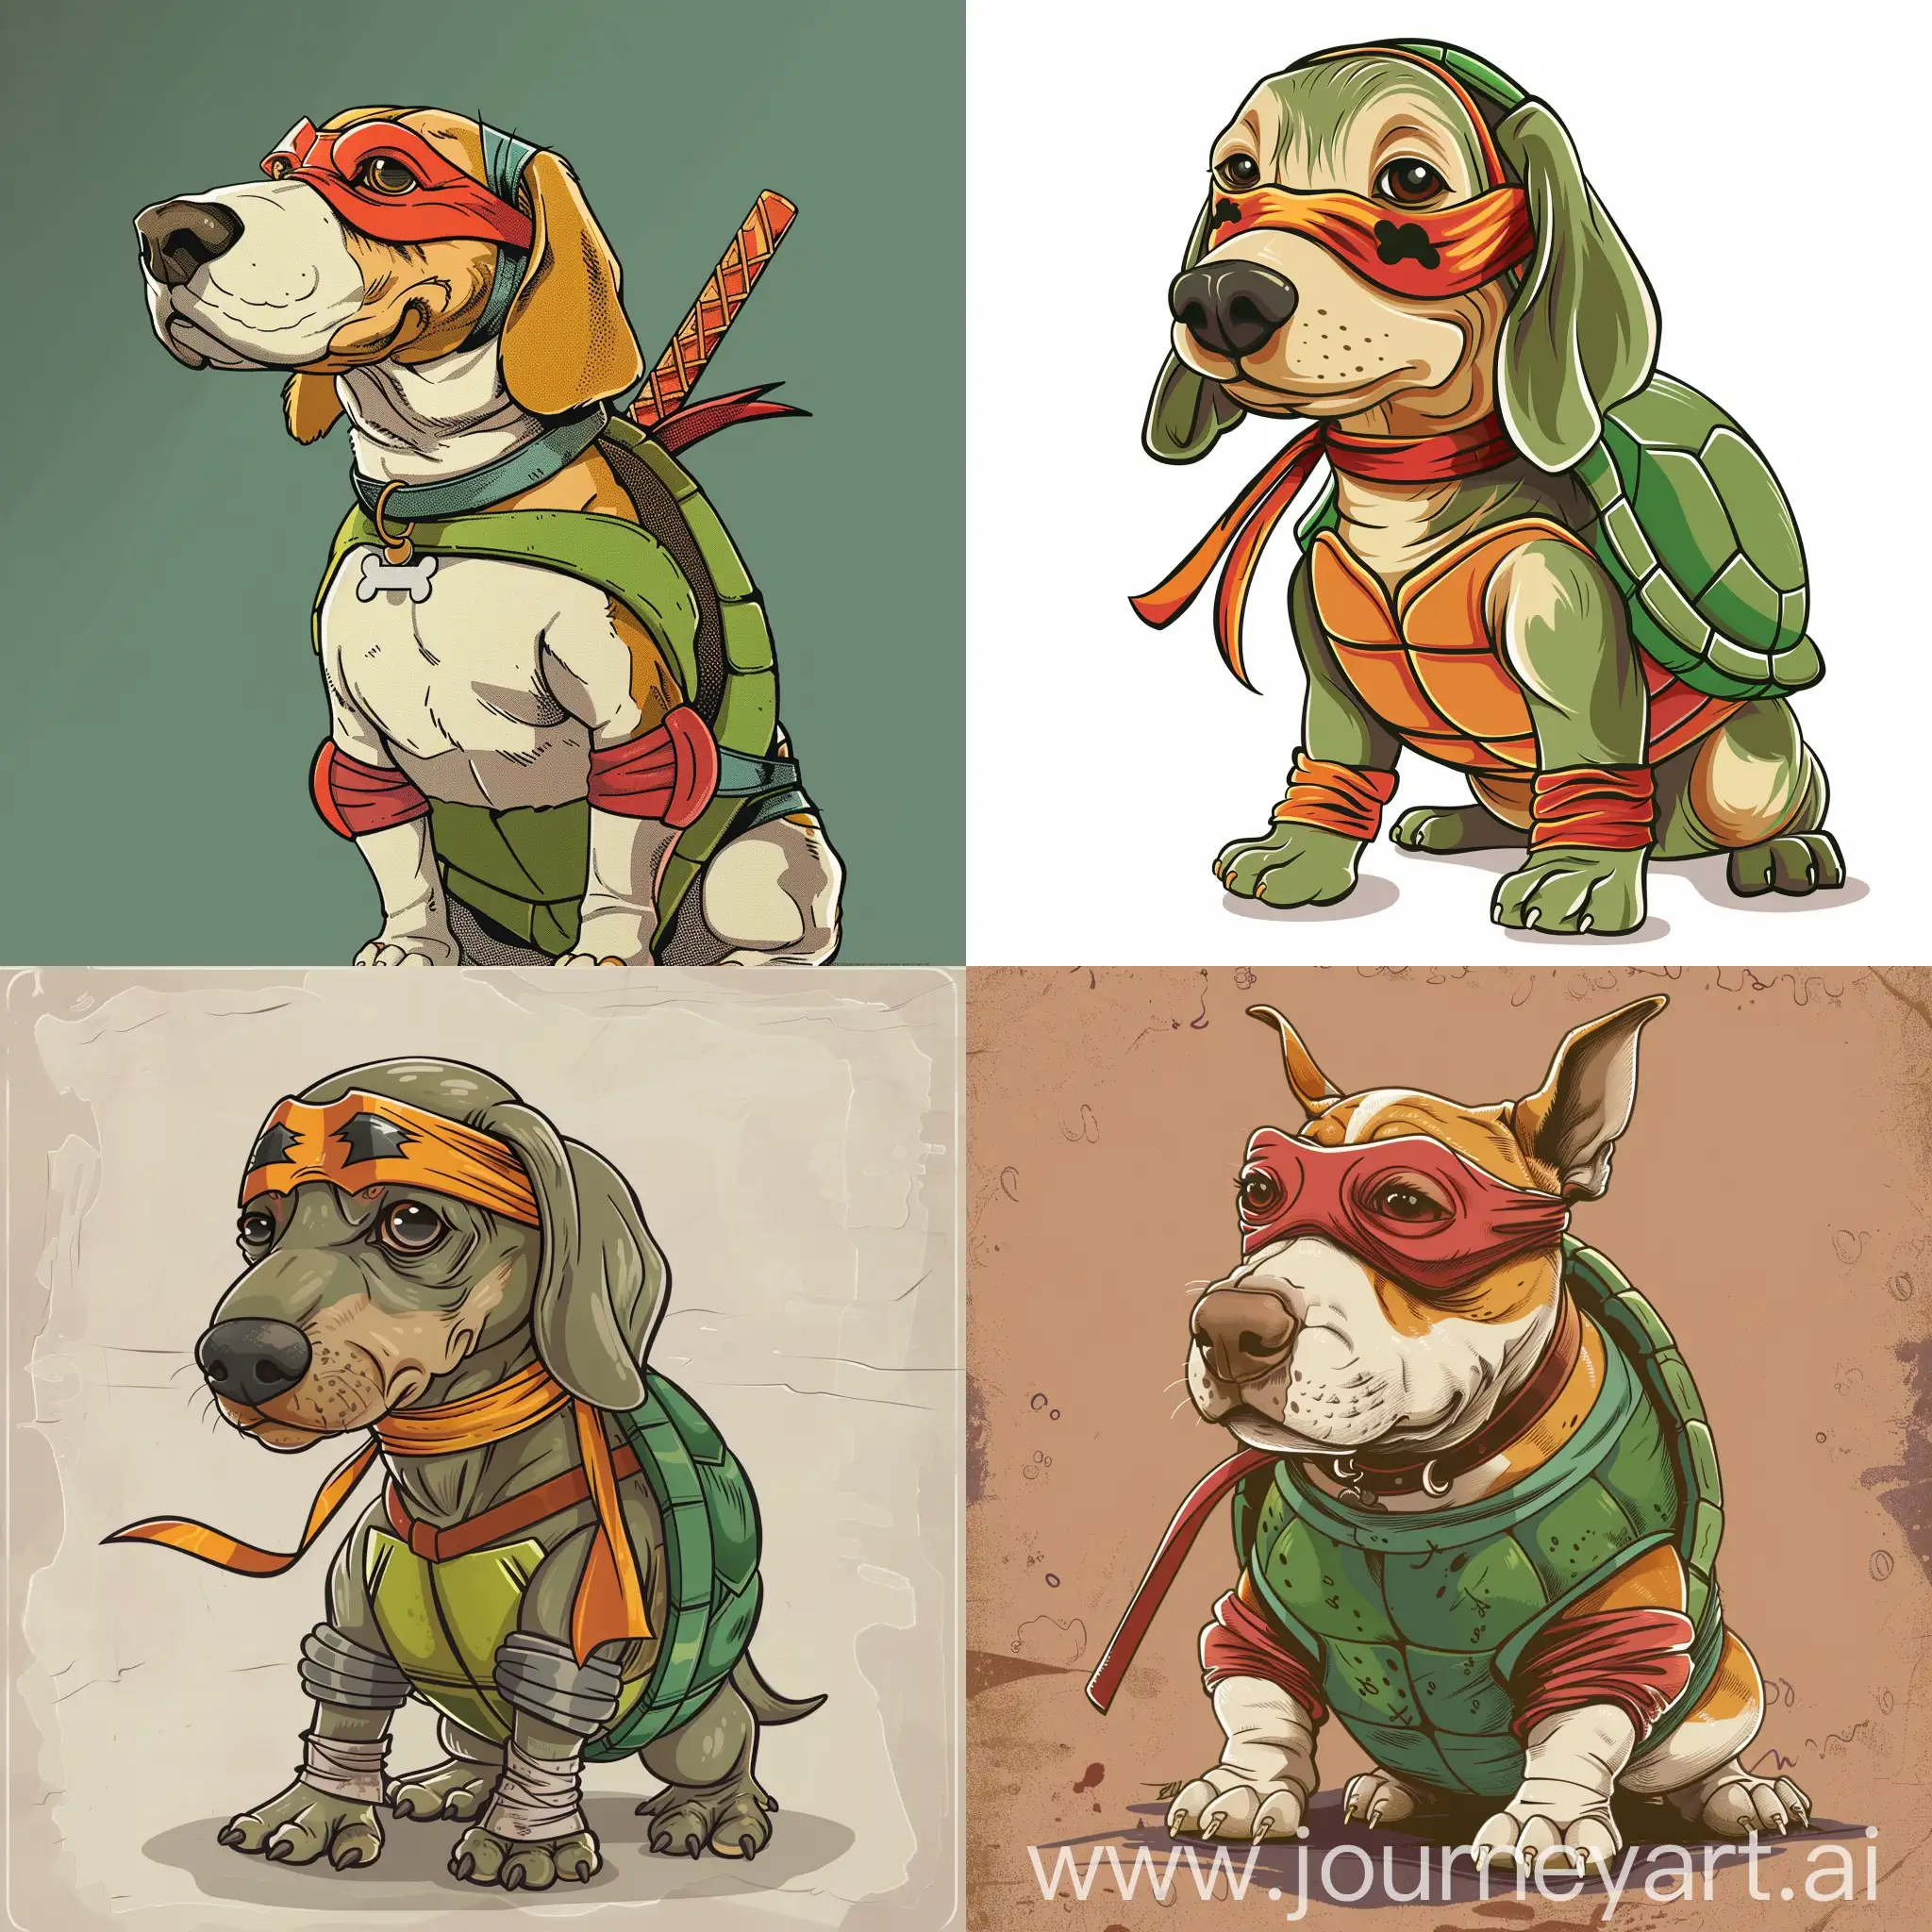 Cartoon-Weiner-Dog-Dressed-as-Ninja-Turtle-with-Playful-Expression